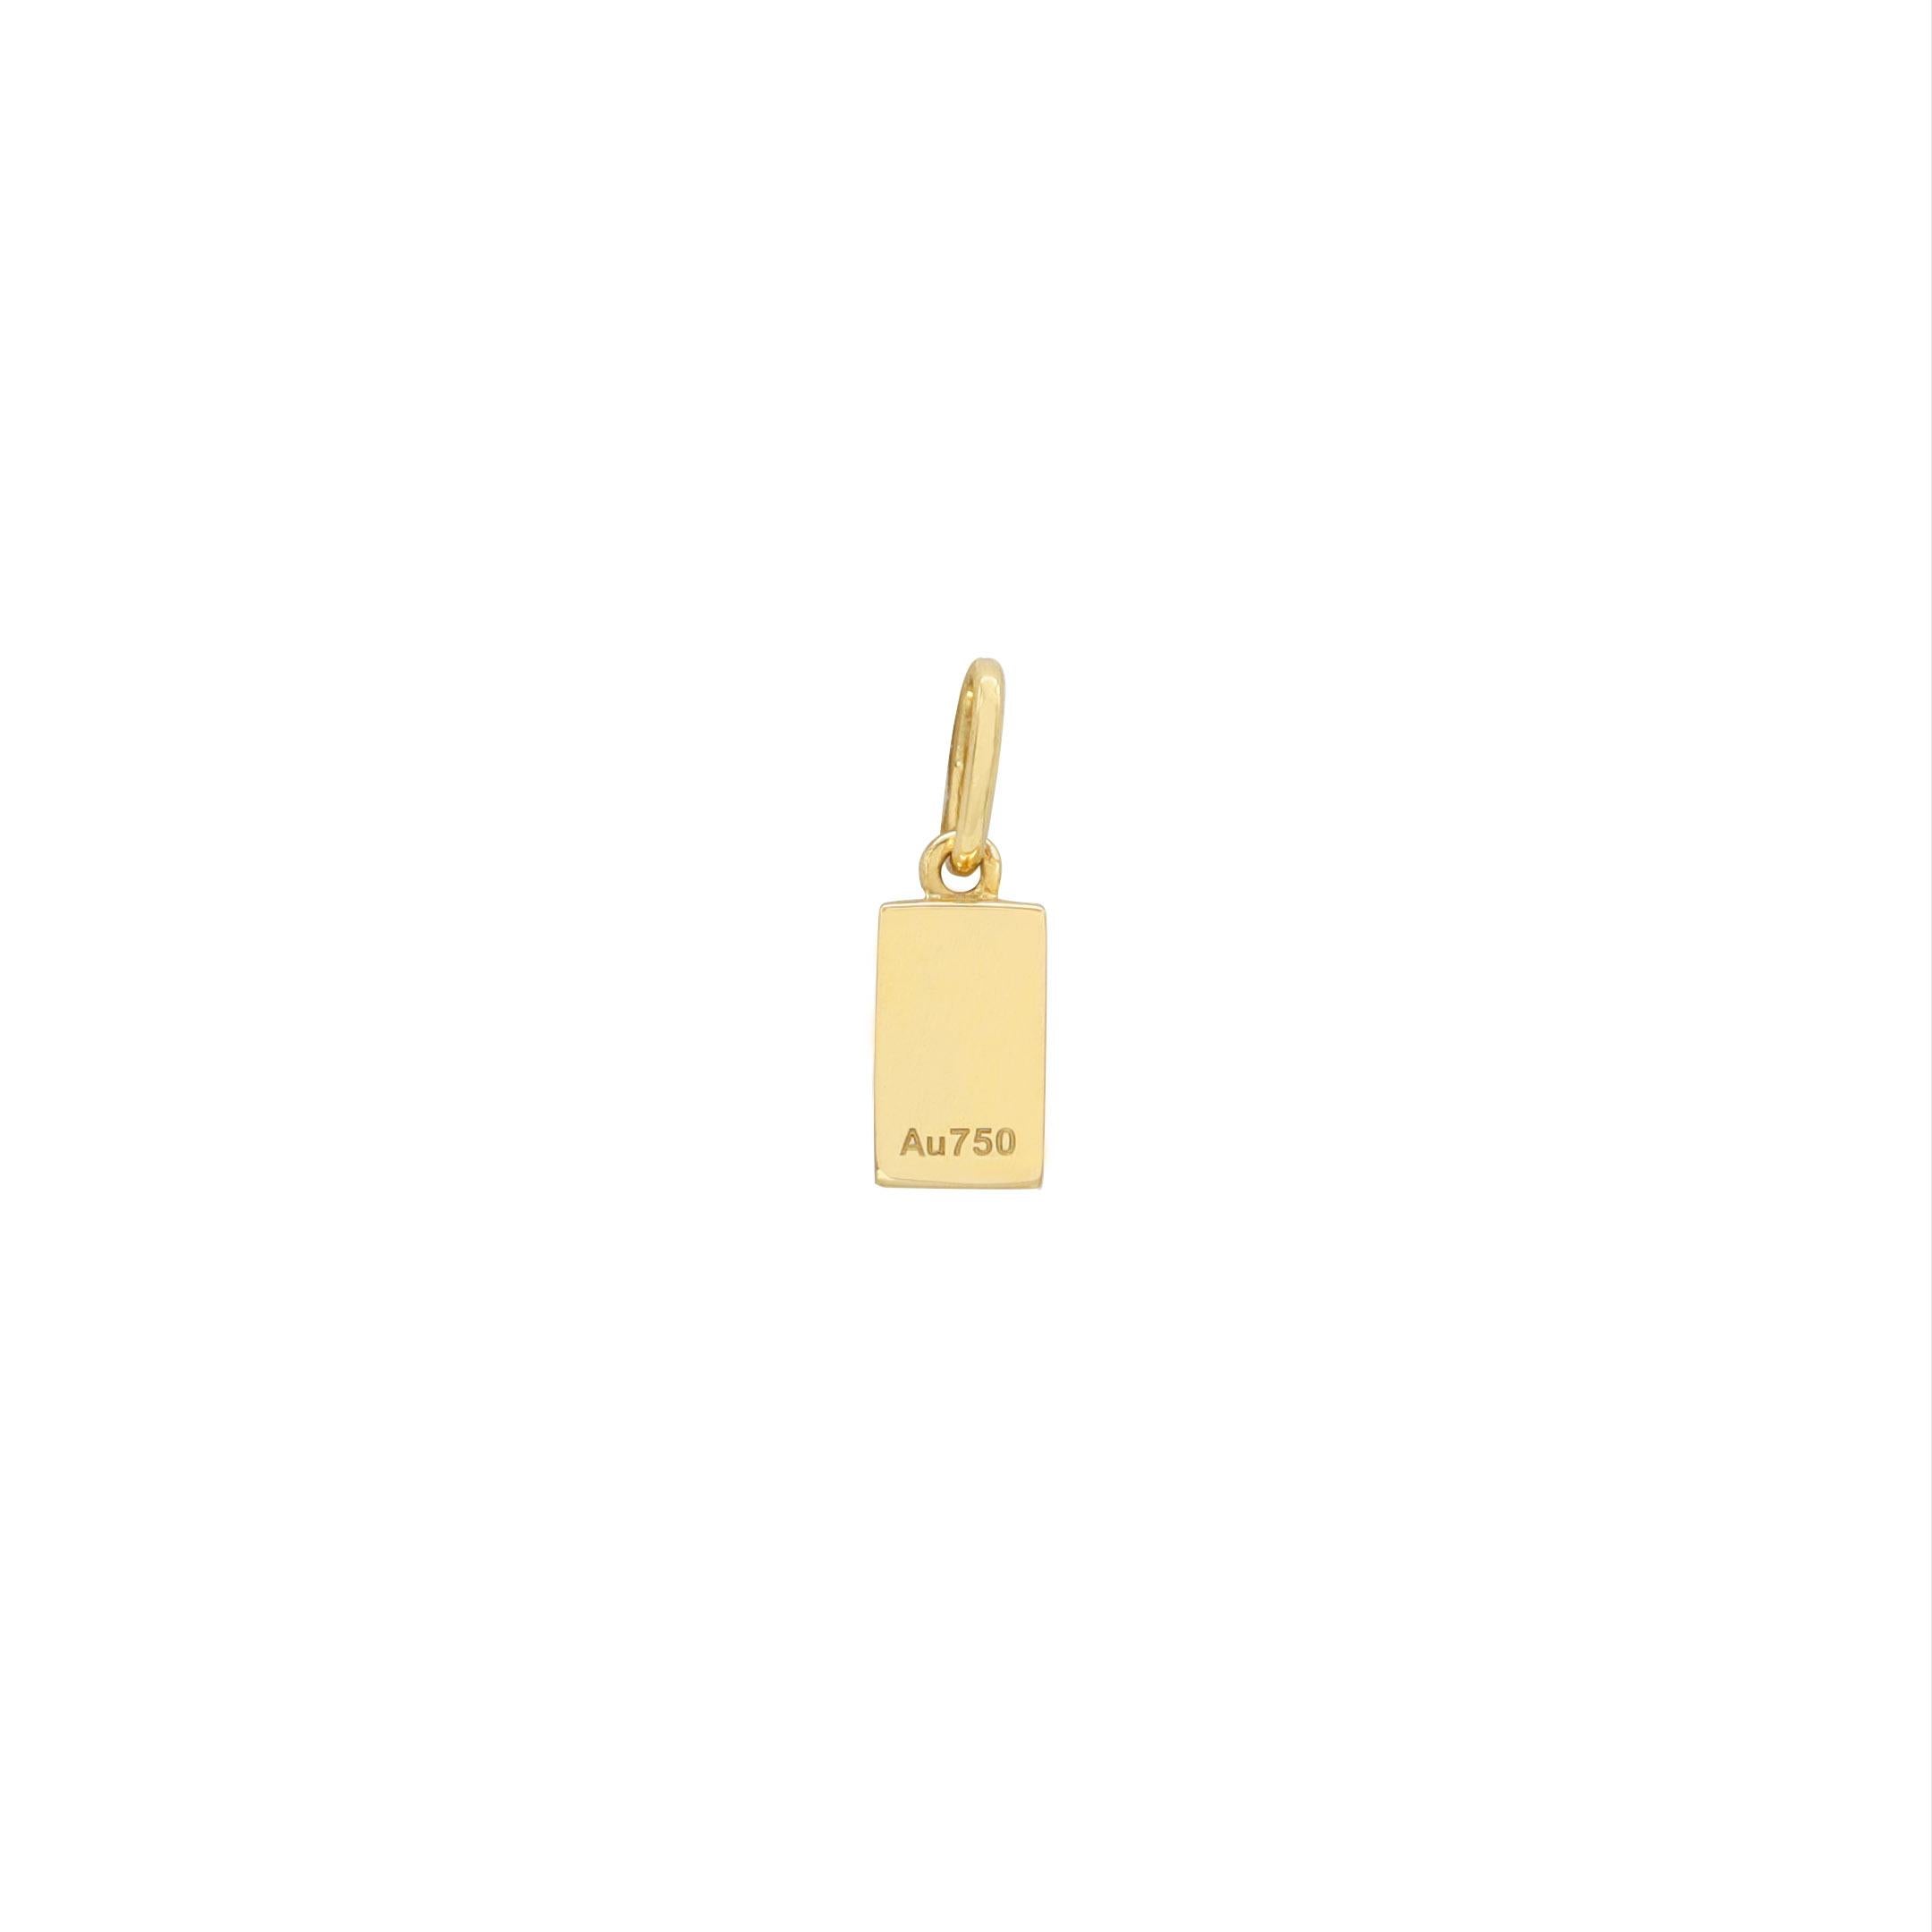 A “1000g gold brick” in a dainty way. 

Made in 18k solid gold
Approximate size: 8.1 x 4.8 x 3.1 mm
Bail size: 4 x 6mm /inner size: 2.5 x 4.6mm

Jewelry is the armor of women. 
At Dainty Dagger, we set the trend when it comes to unique and